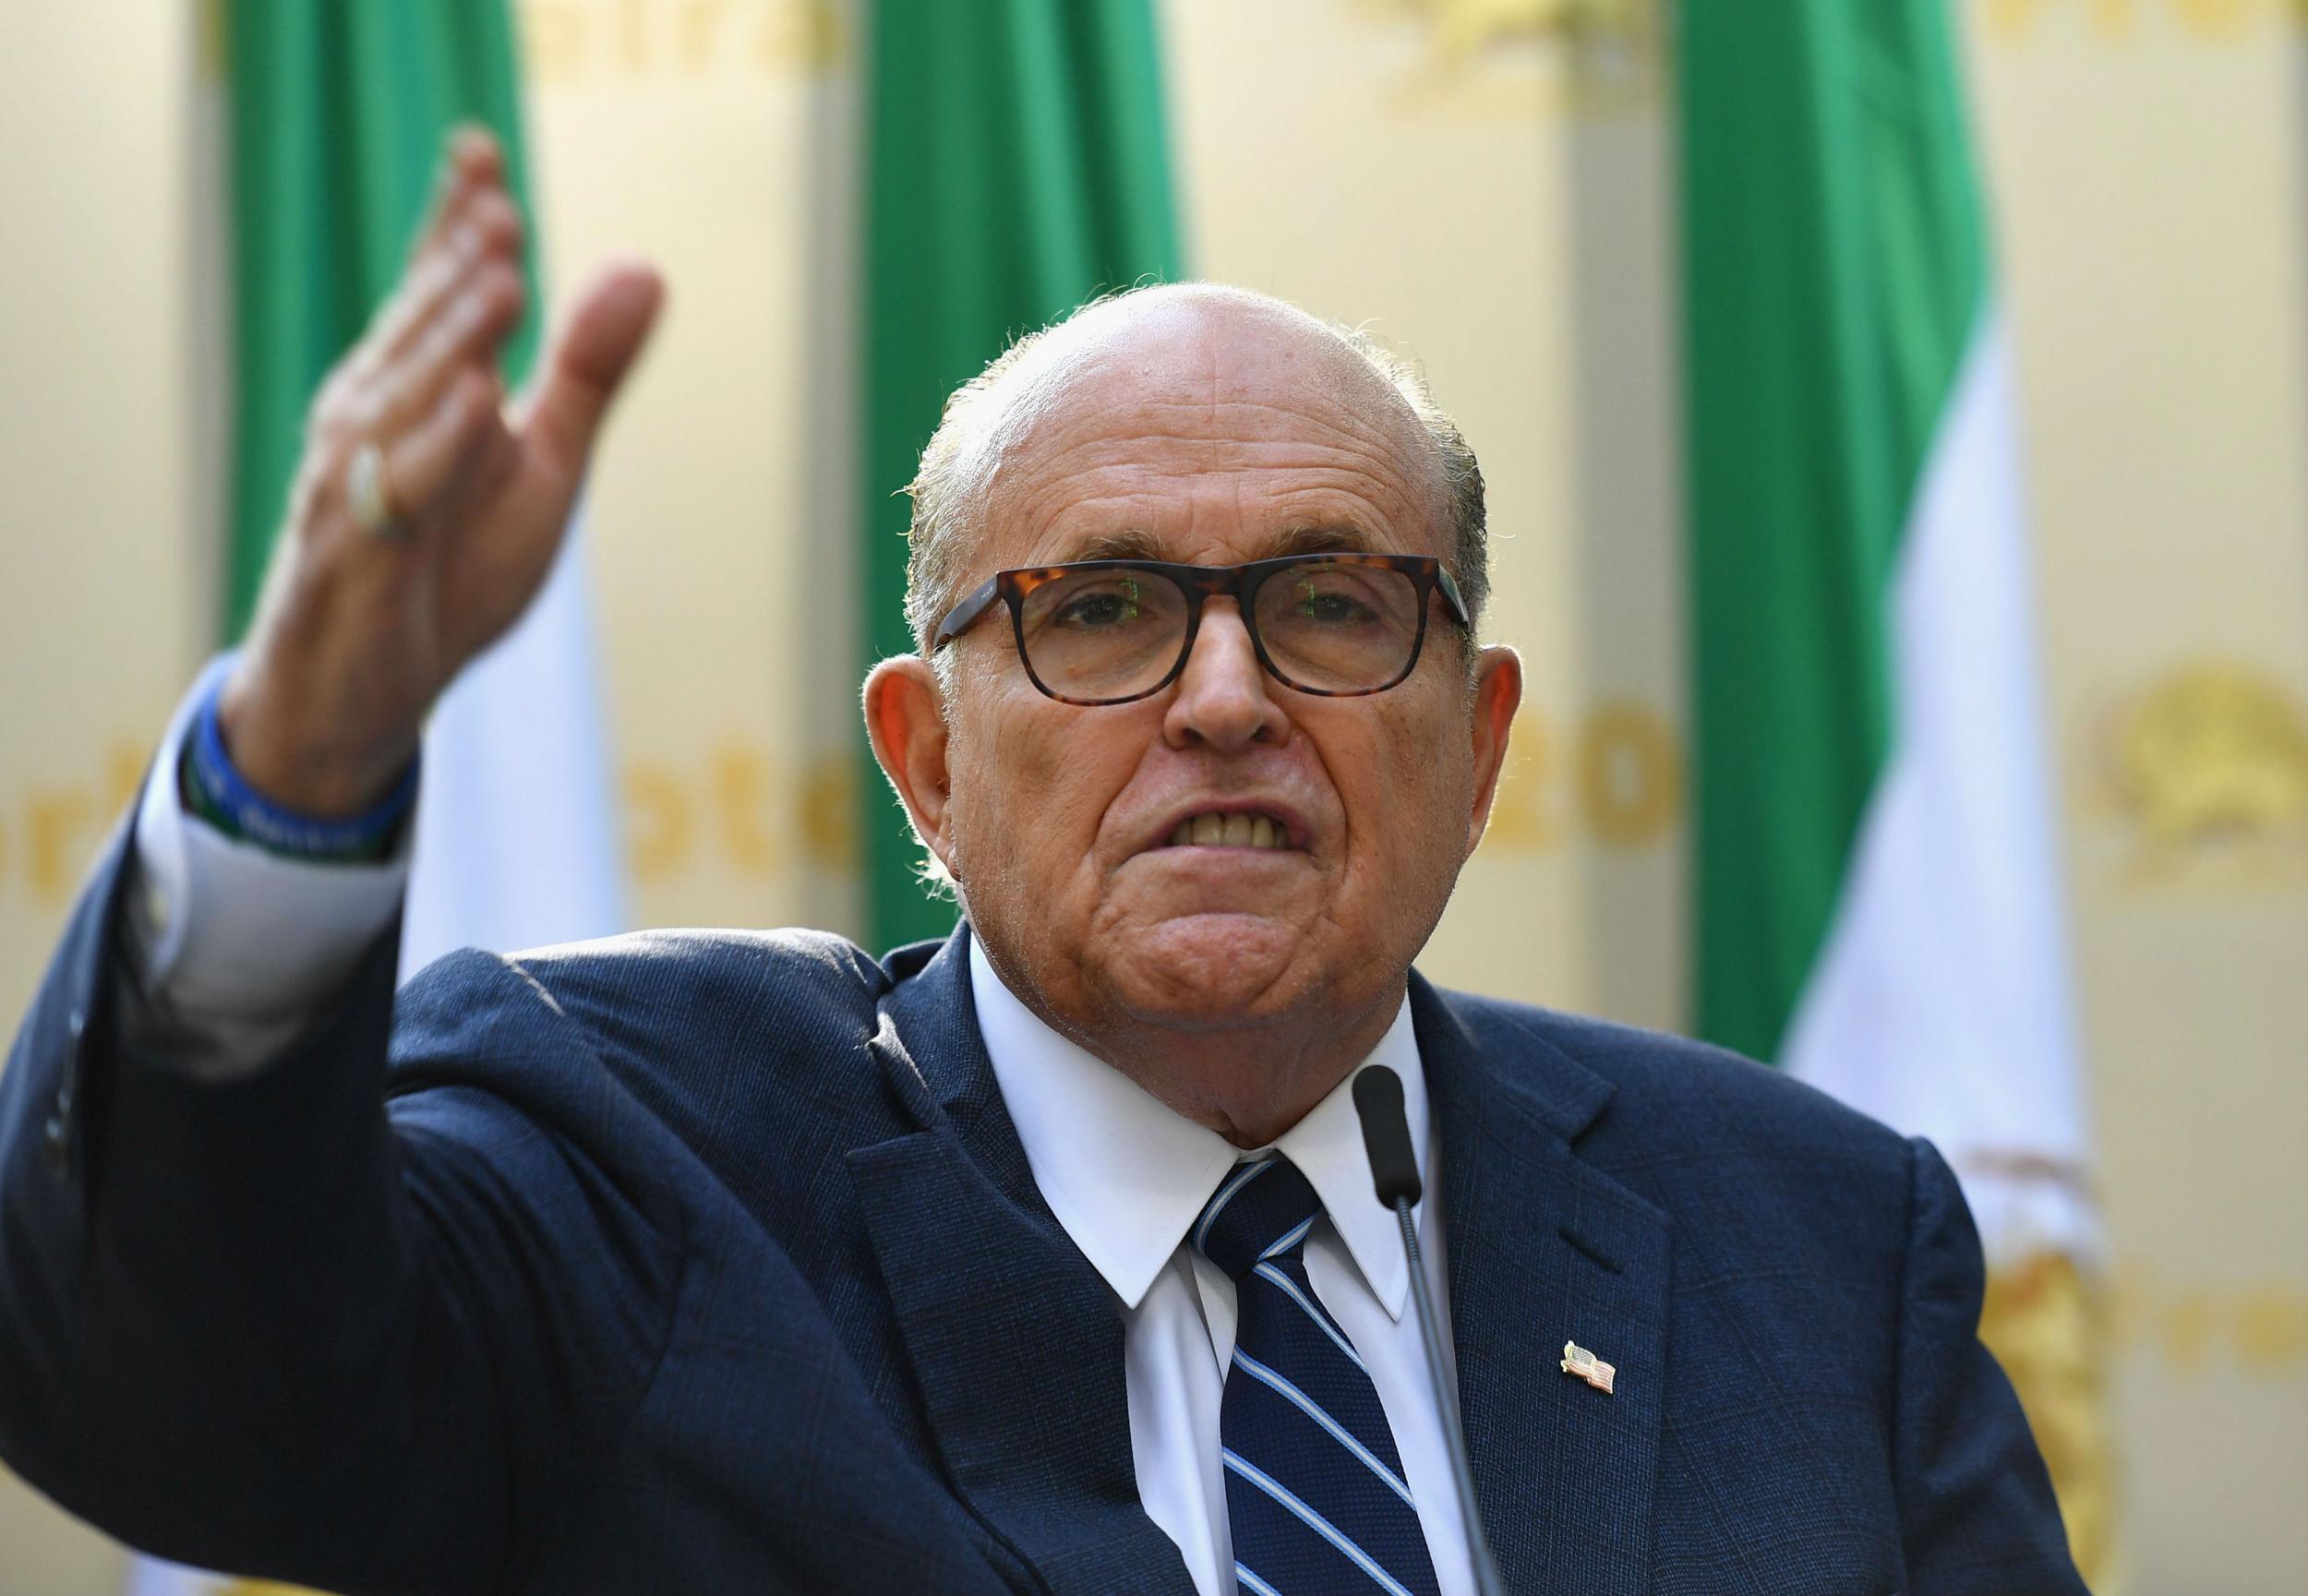 Mr Giuliani has repeatedly said he has never had dealings with the eastern European country